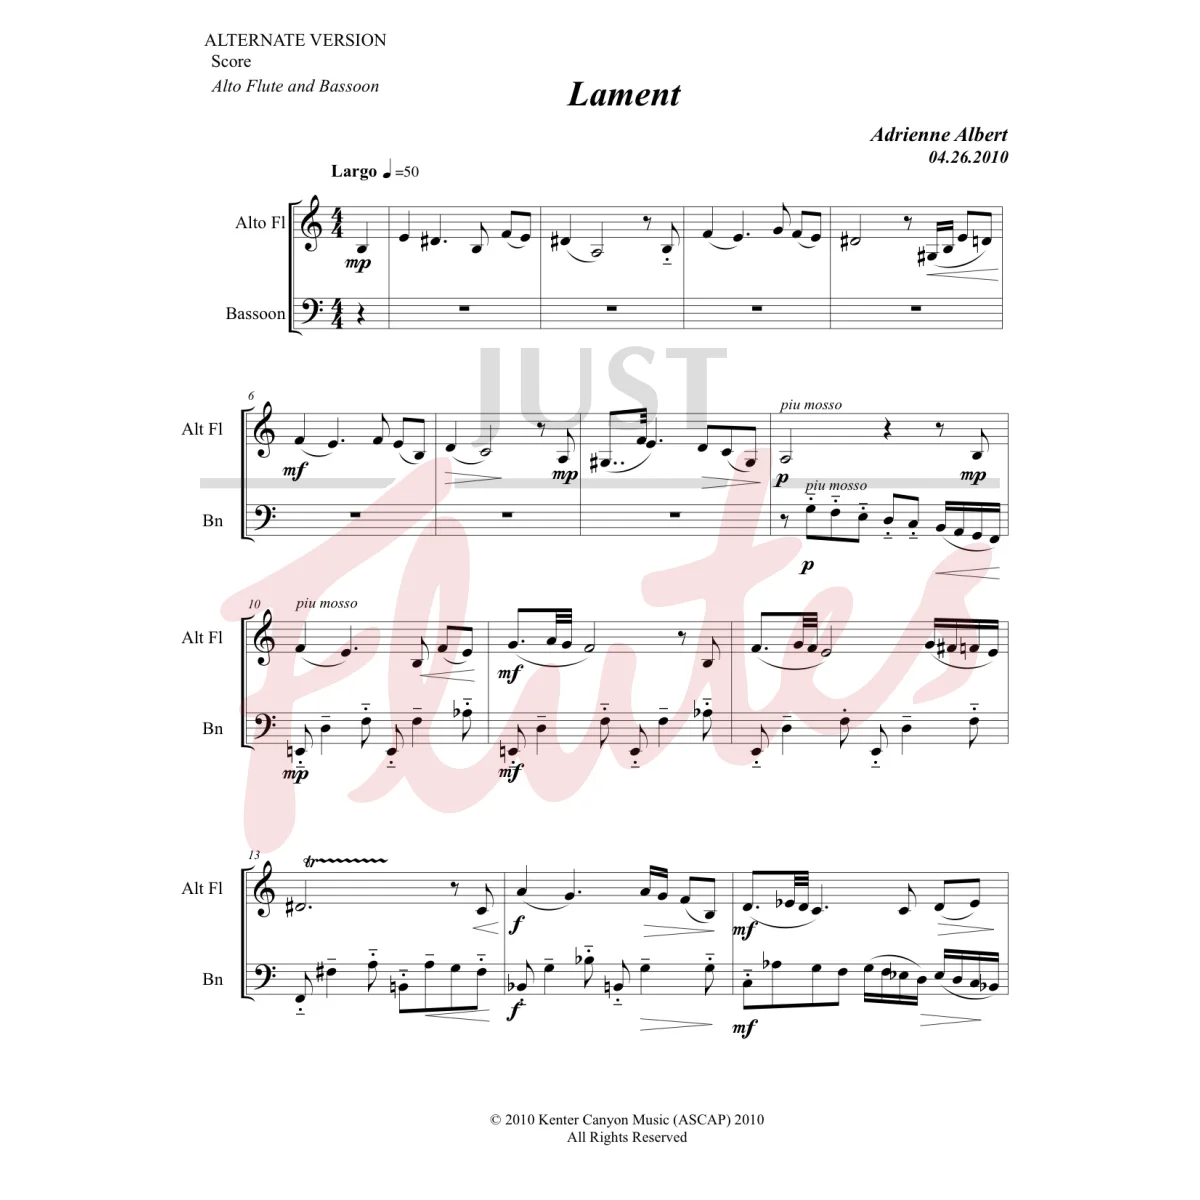 Lament for Alto Flute and Bassoon